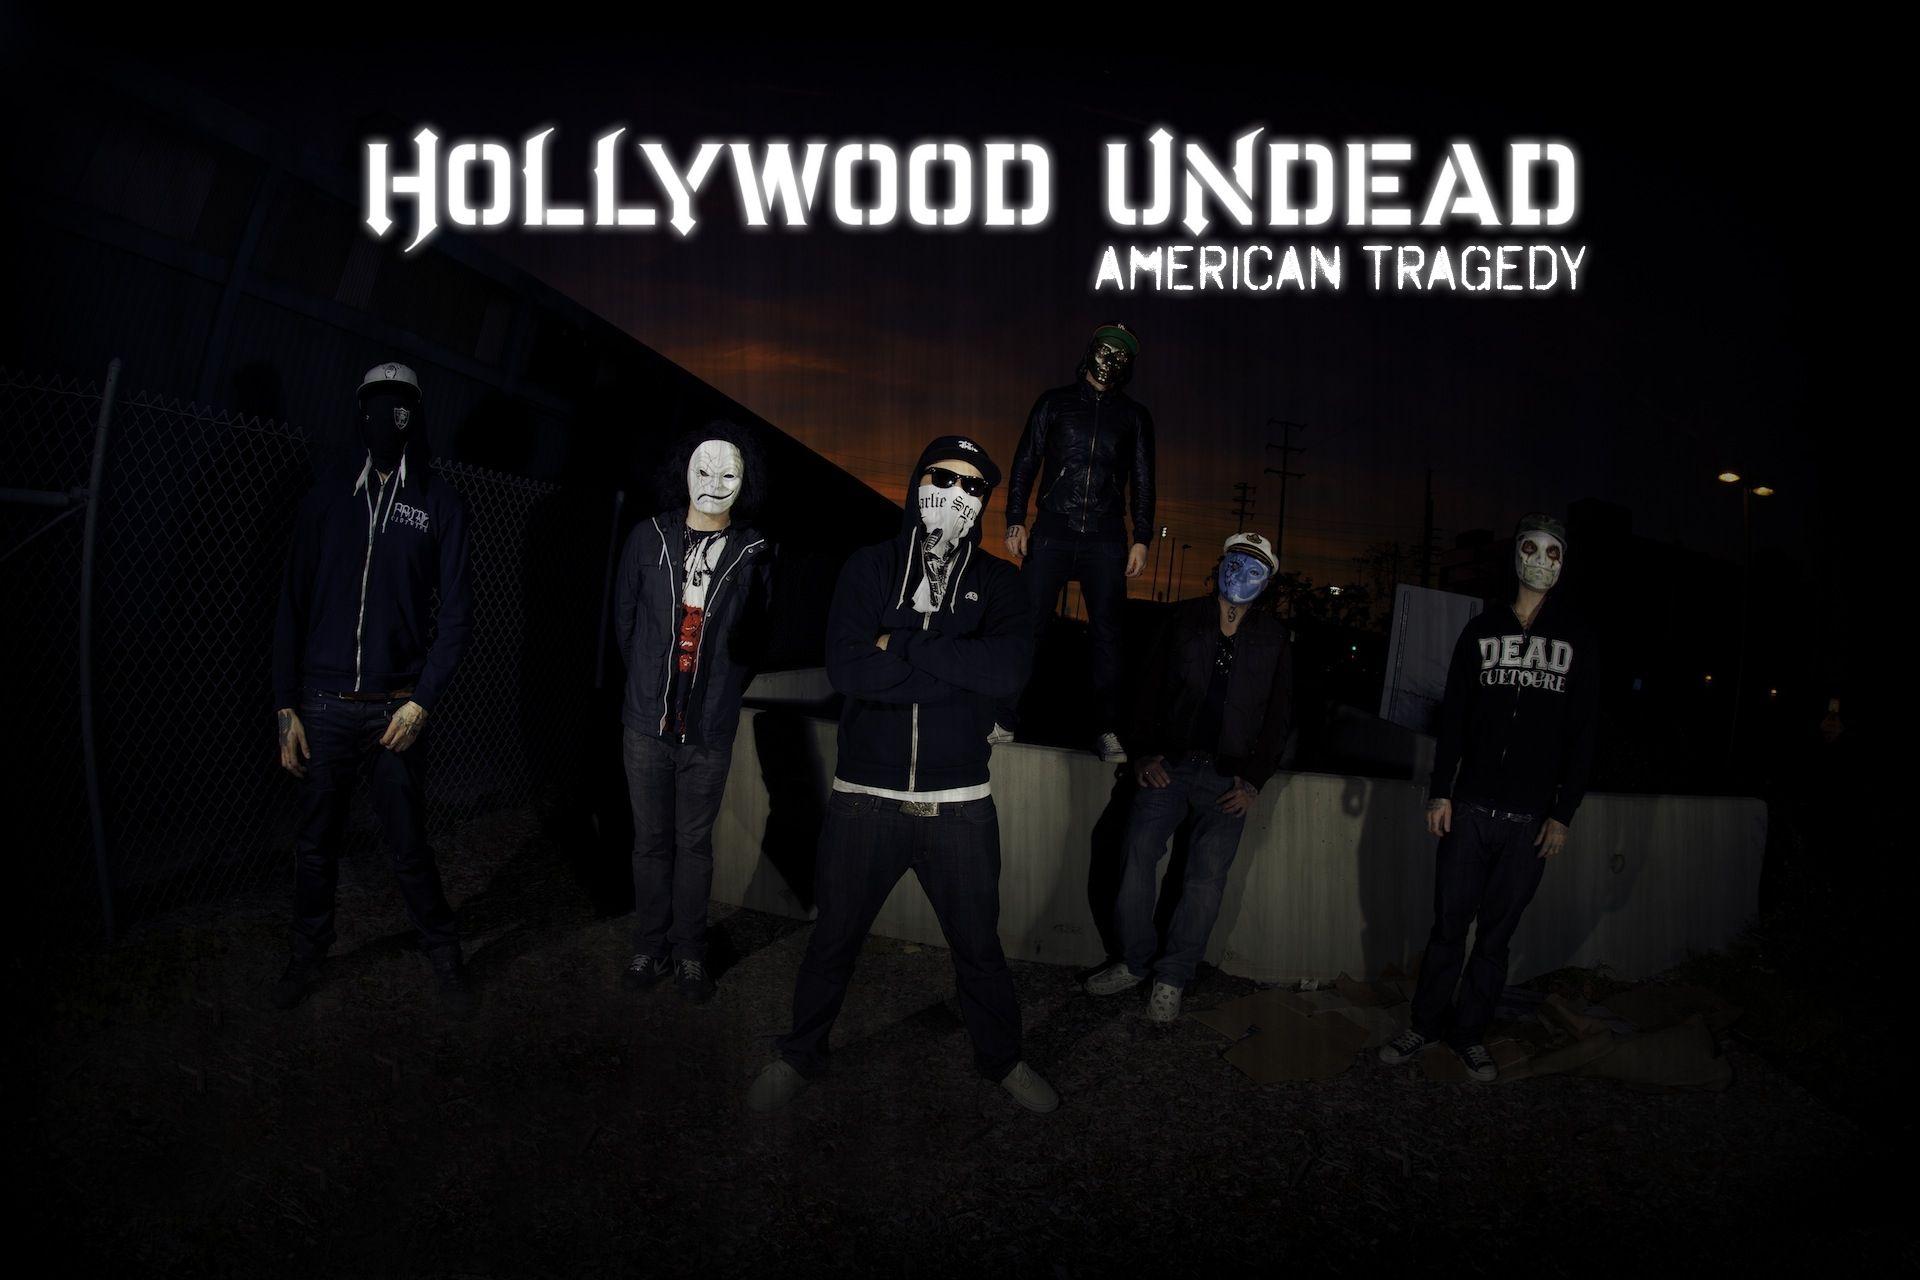 Wallpaper.wiki Hollywood Undead Wallpaper HD PIC WPE003633